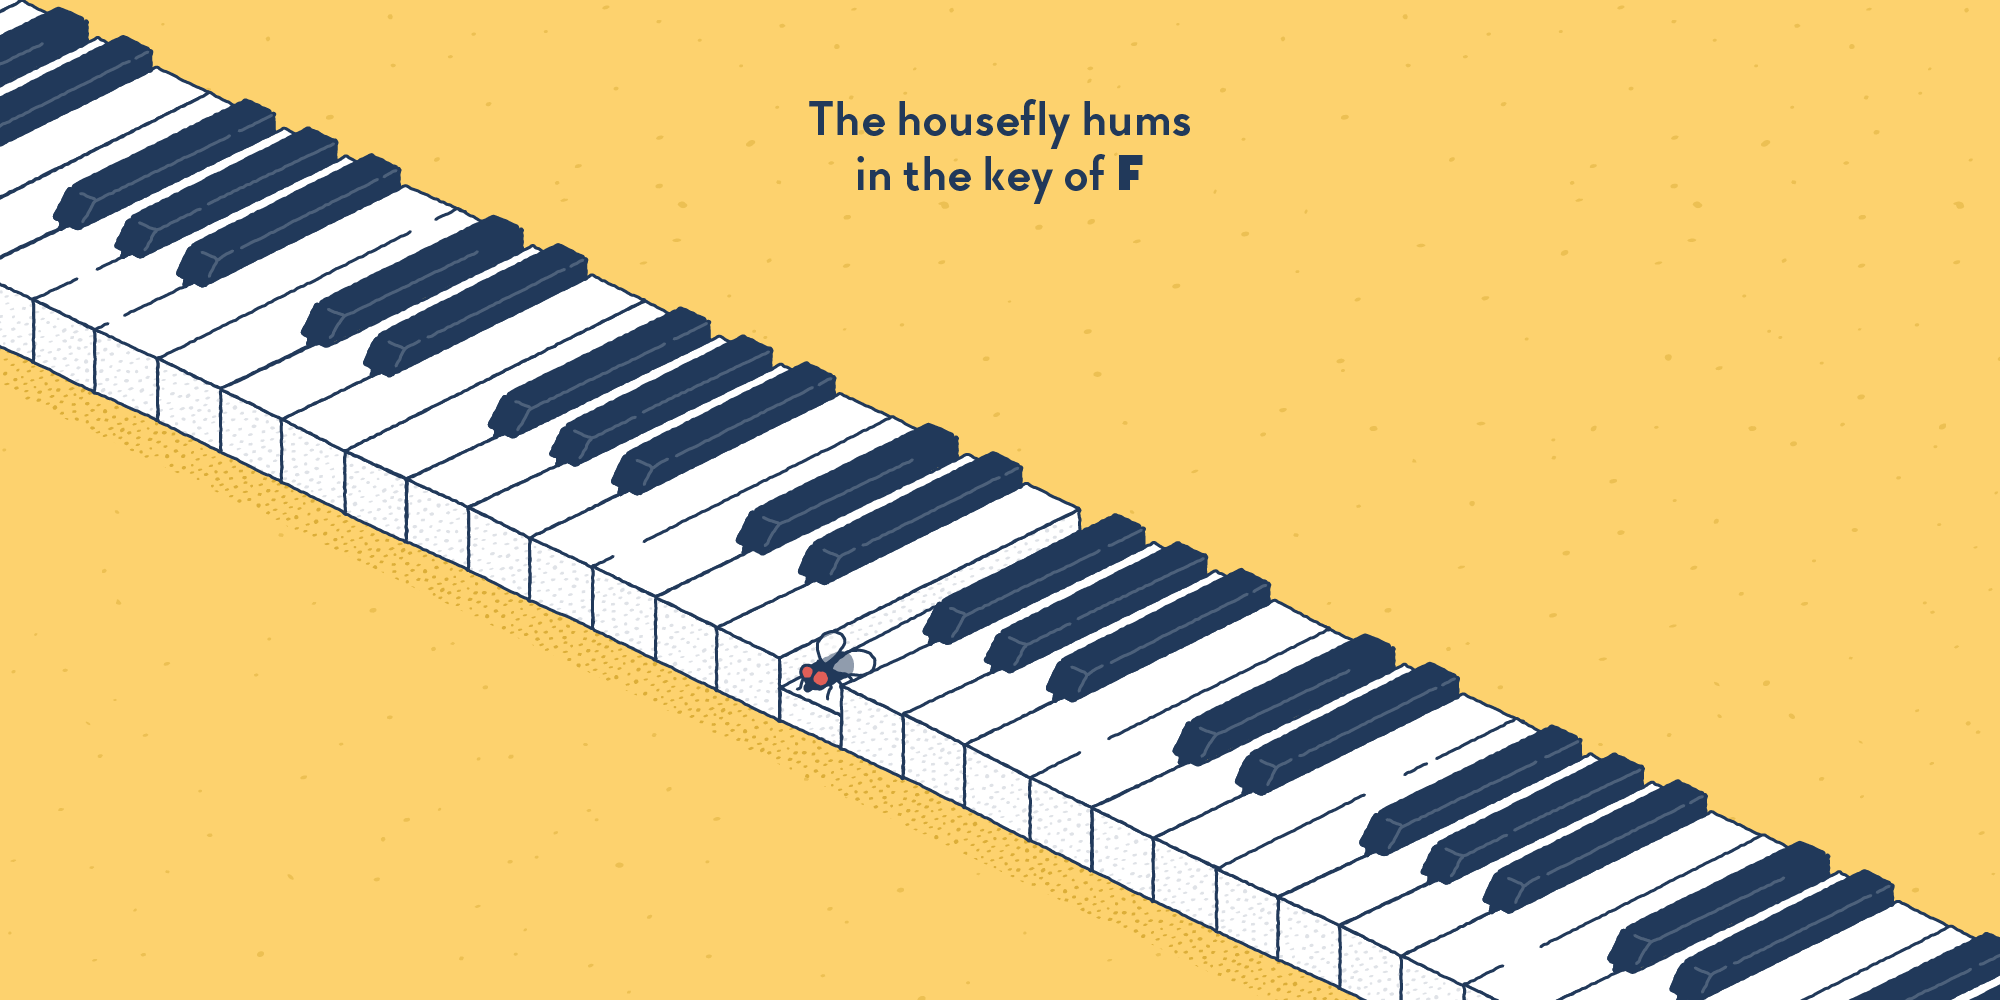 A little fly pressing the middle F key of a large piano keyboard